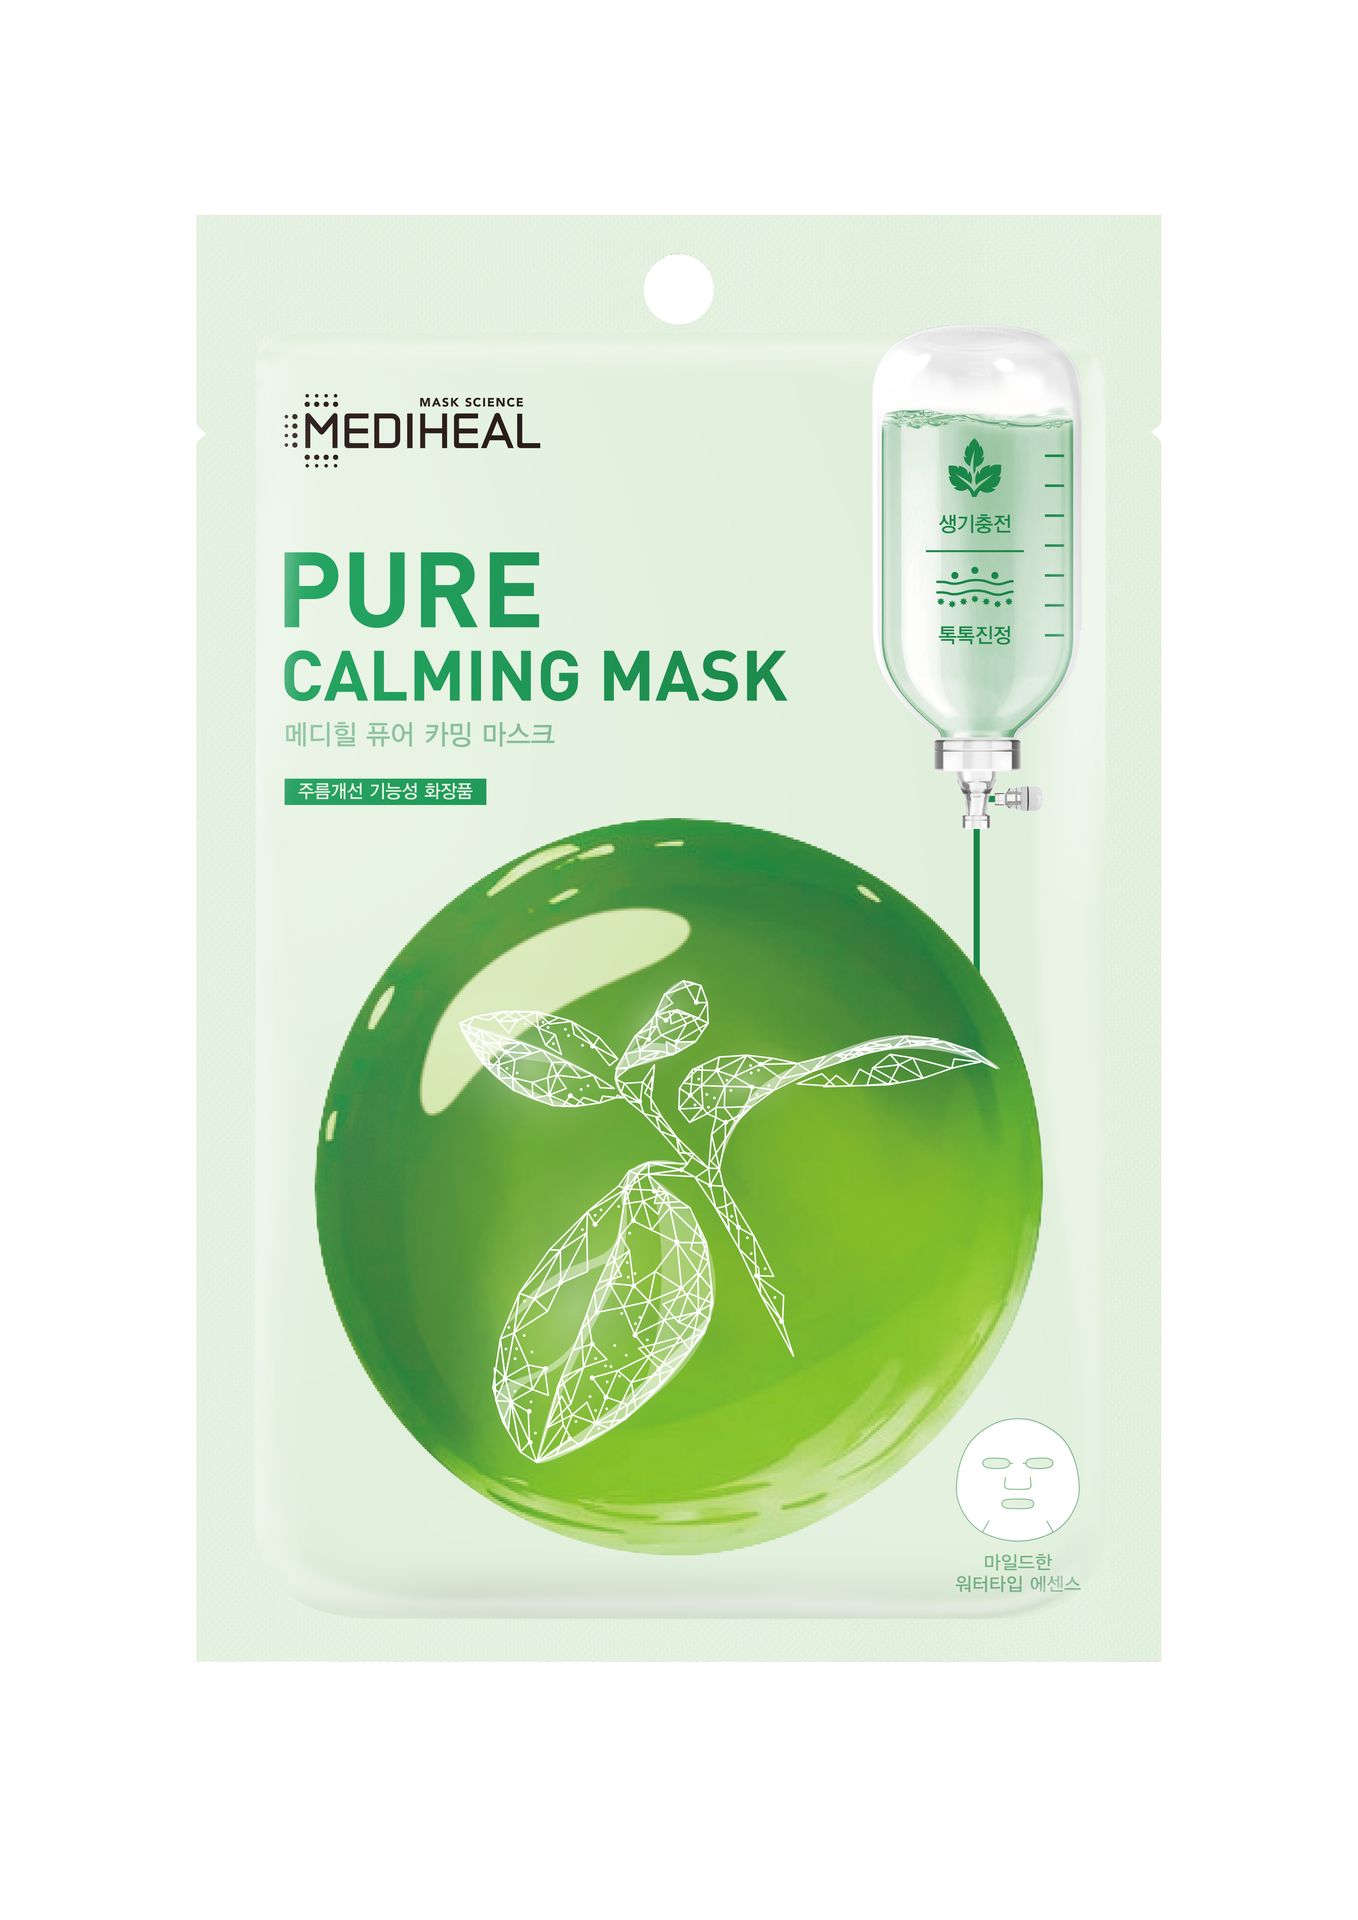 PURE CALMING MASK